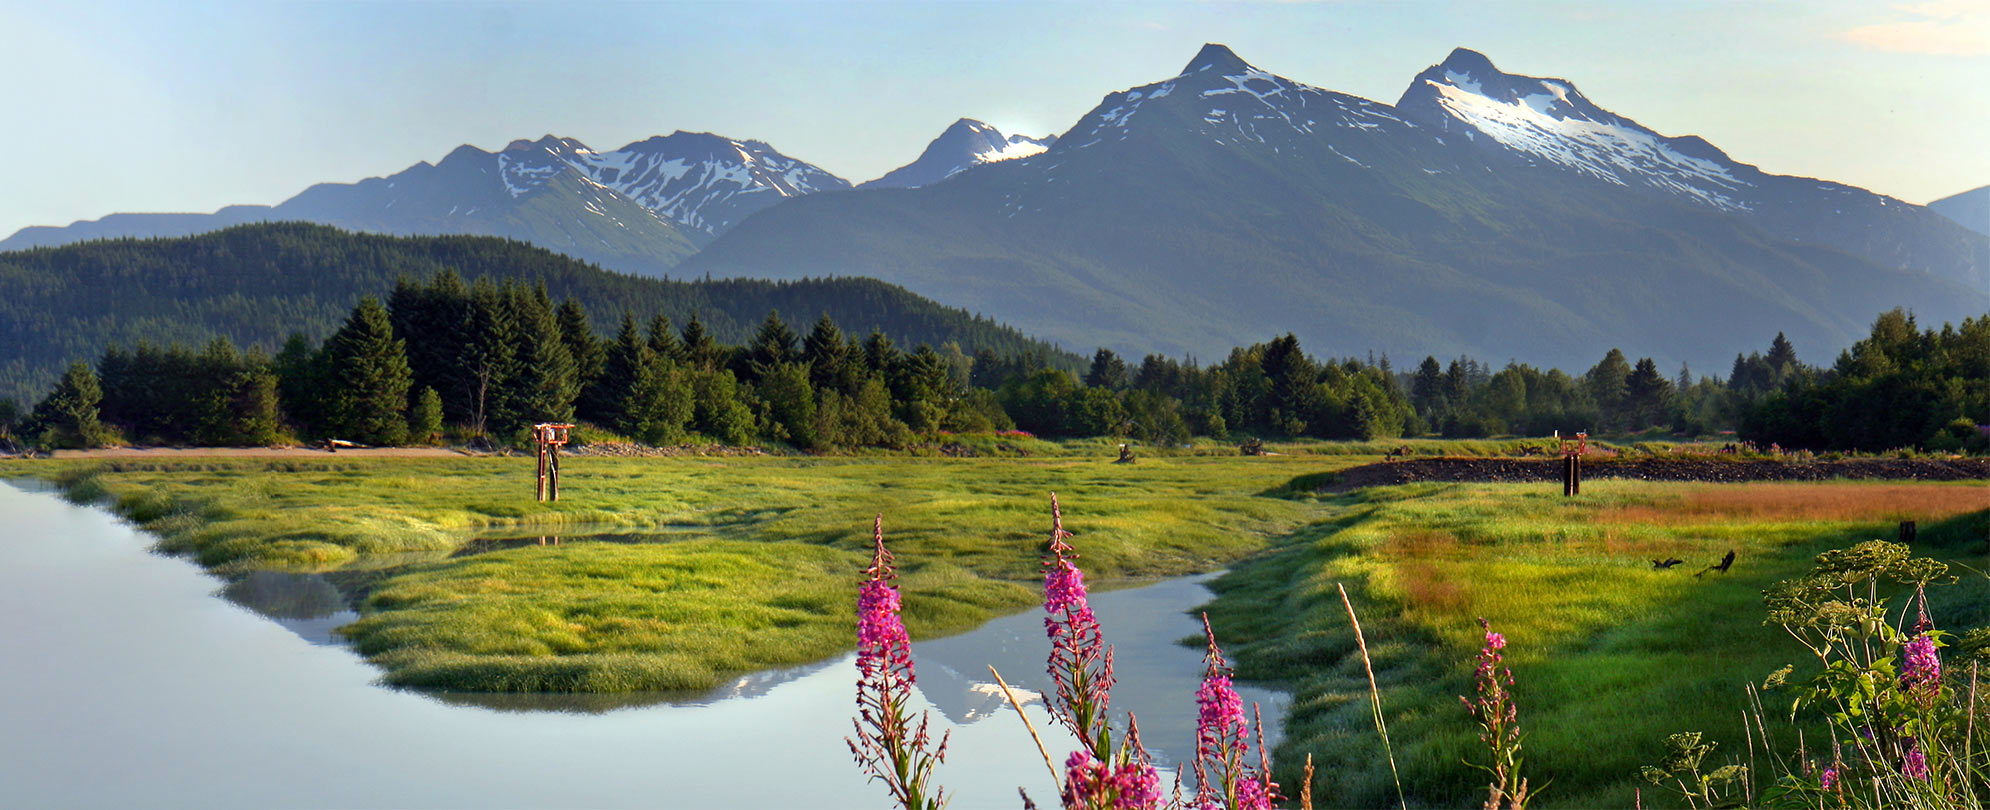 Field by a lake surrounded by flowers, pine trees, and snow covered mountains in Alaska.